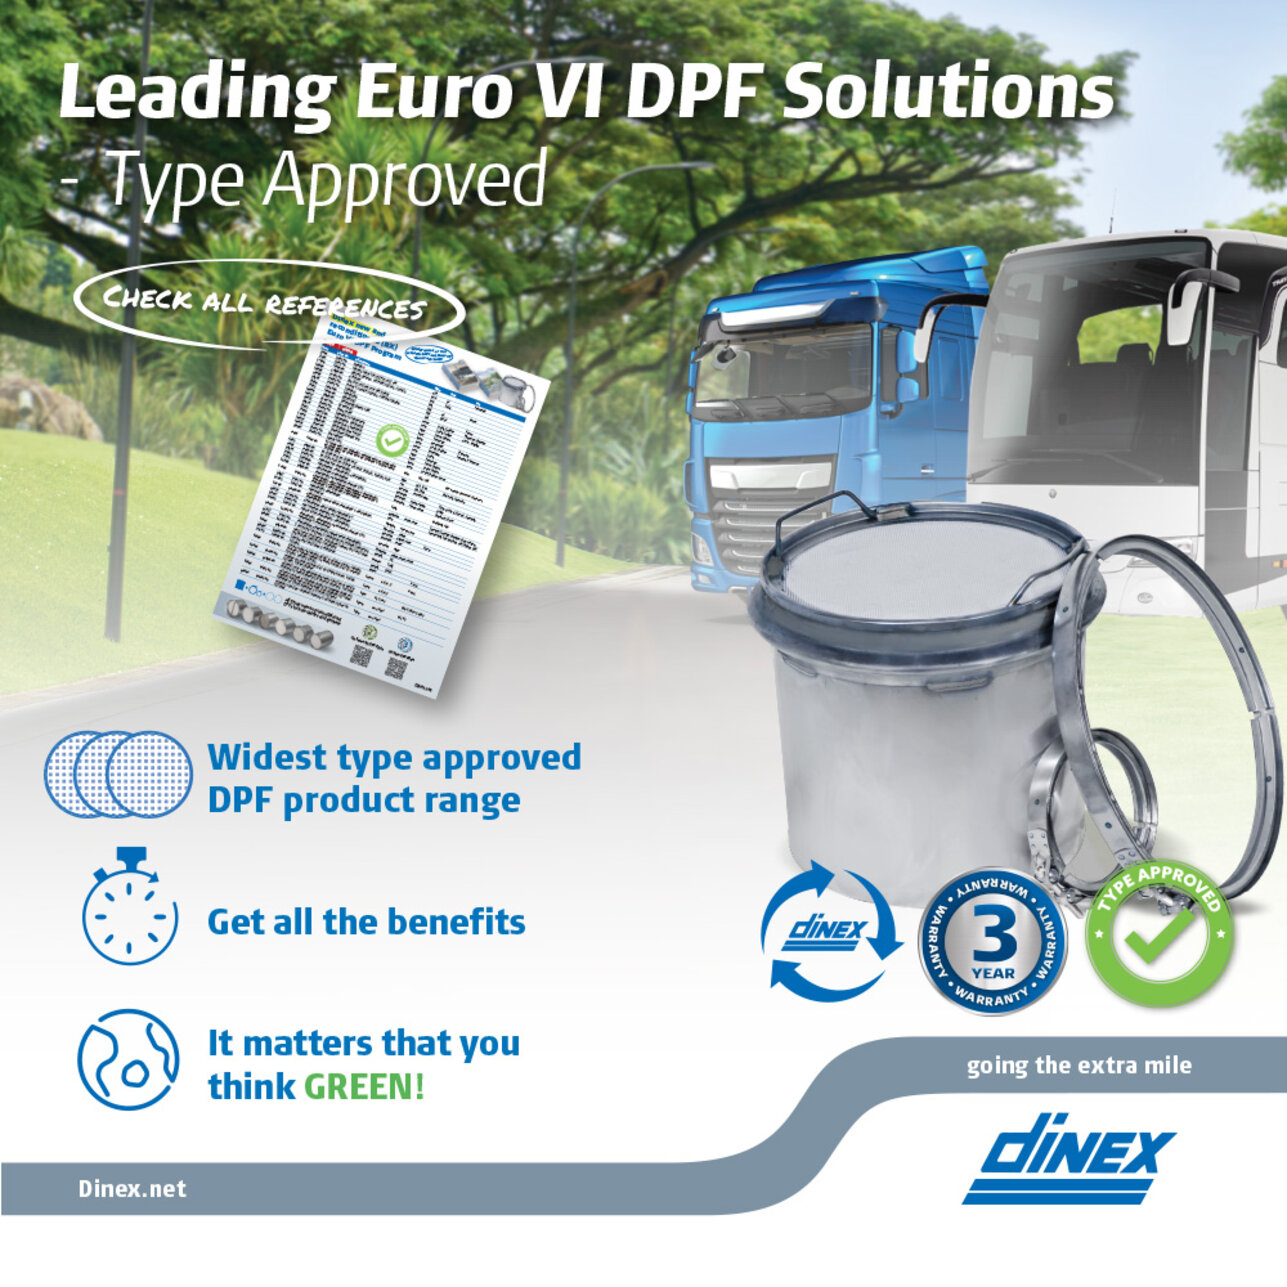 Leading Euro VI DPF Solutions - Type Approved